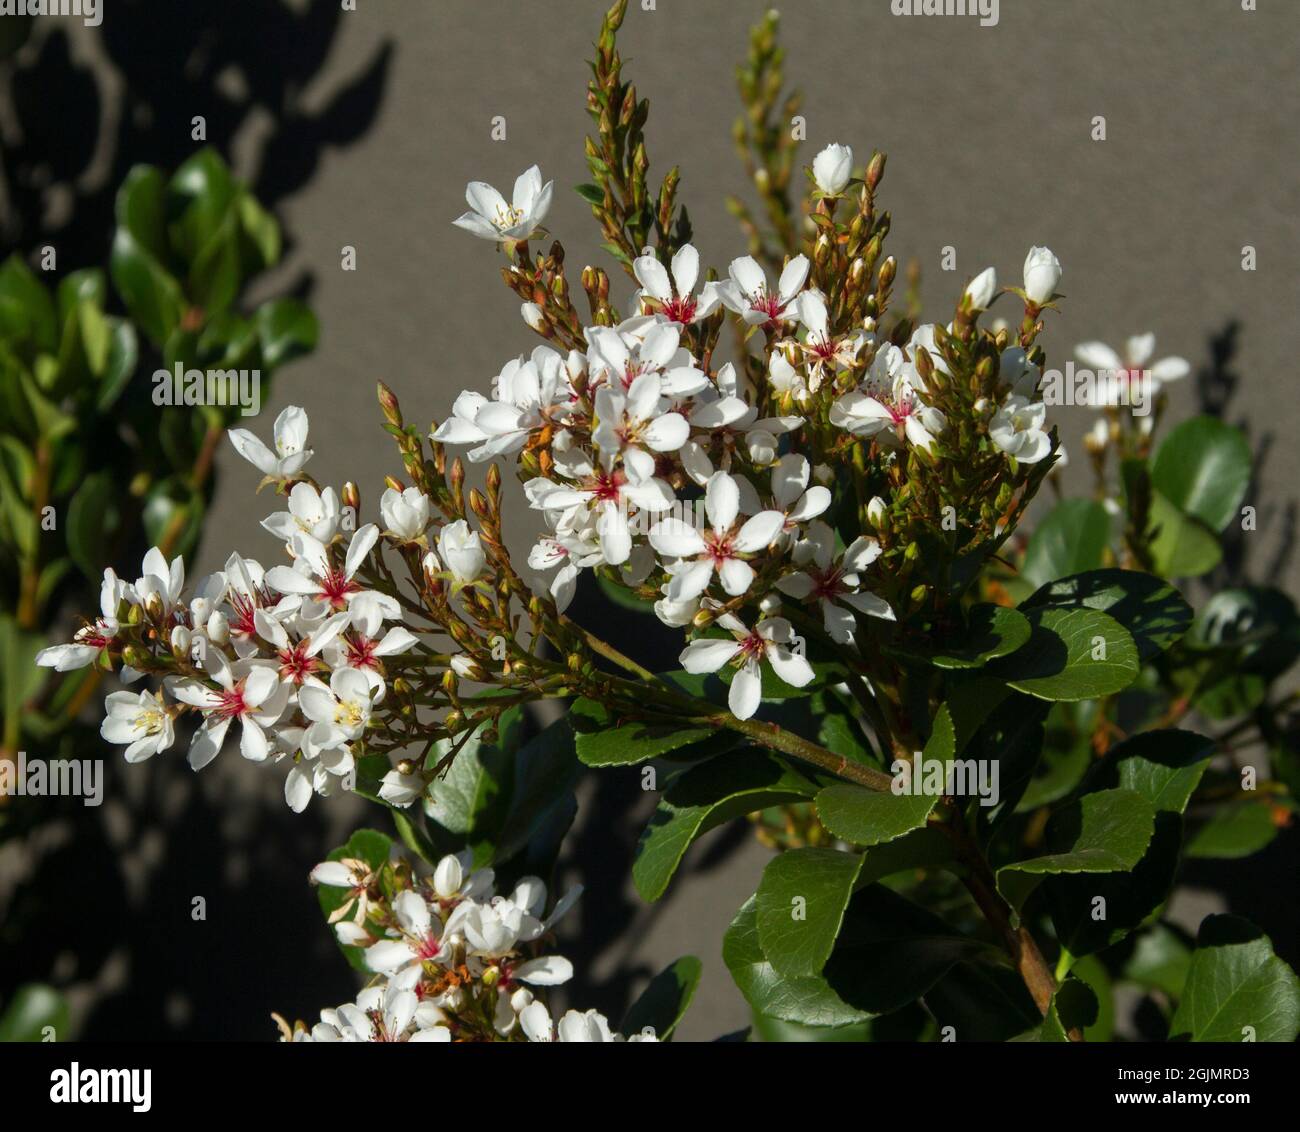 Perfumed white flowers of Rhaphiolpsis indica, Indian Hawthorn, drought tolerant evergreen garden shrub, on background of green foliage Stock Photo